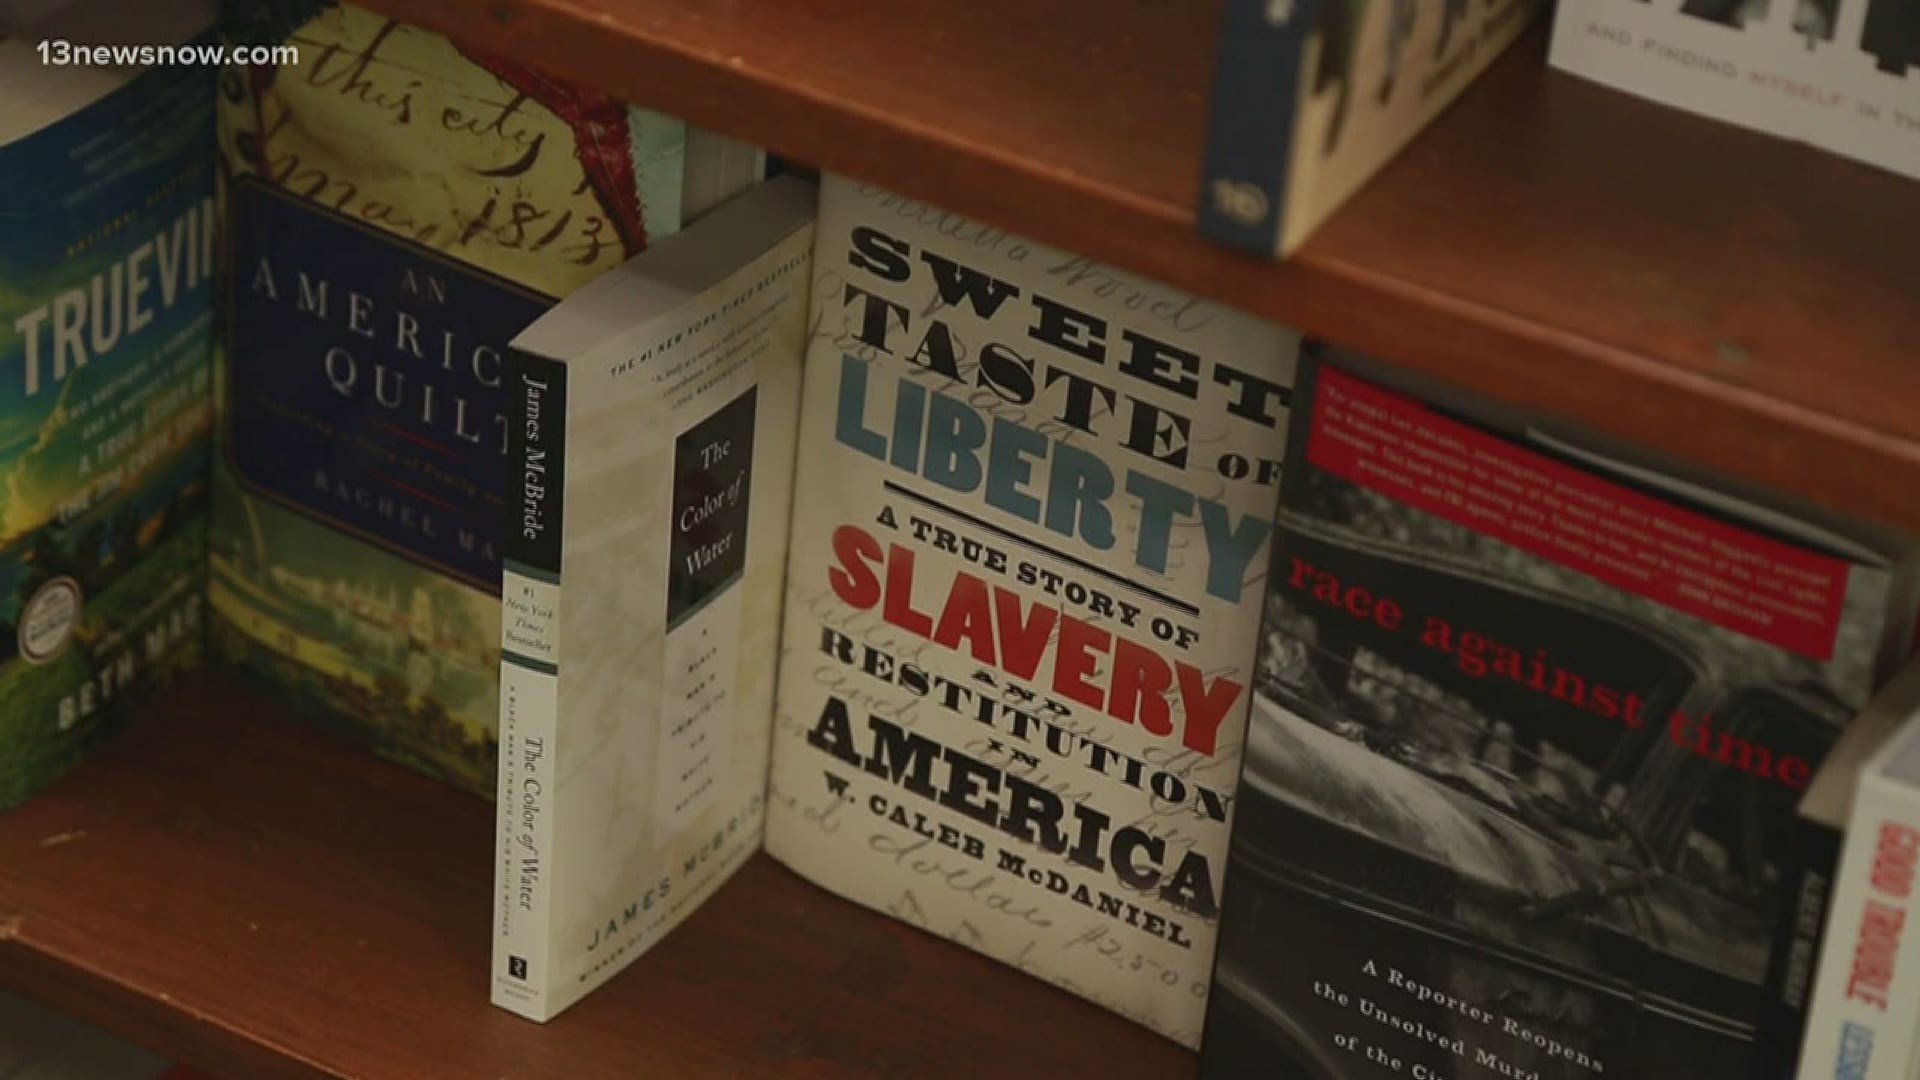 Many are looking for ways to educate themselves about it, so they're turning to books.